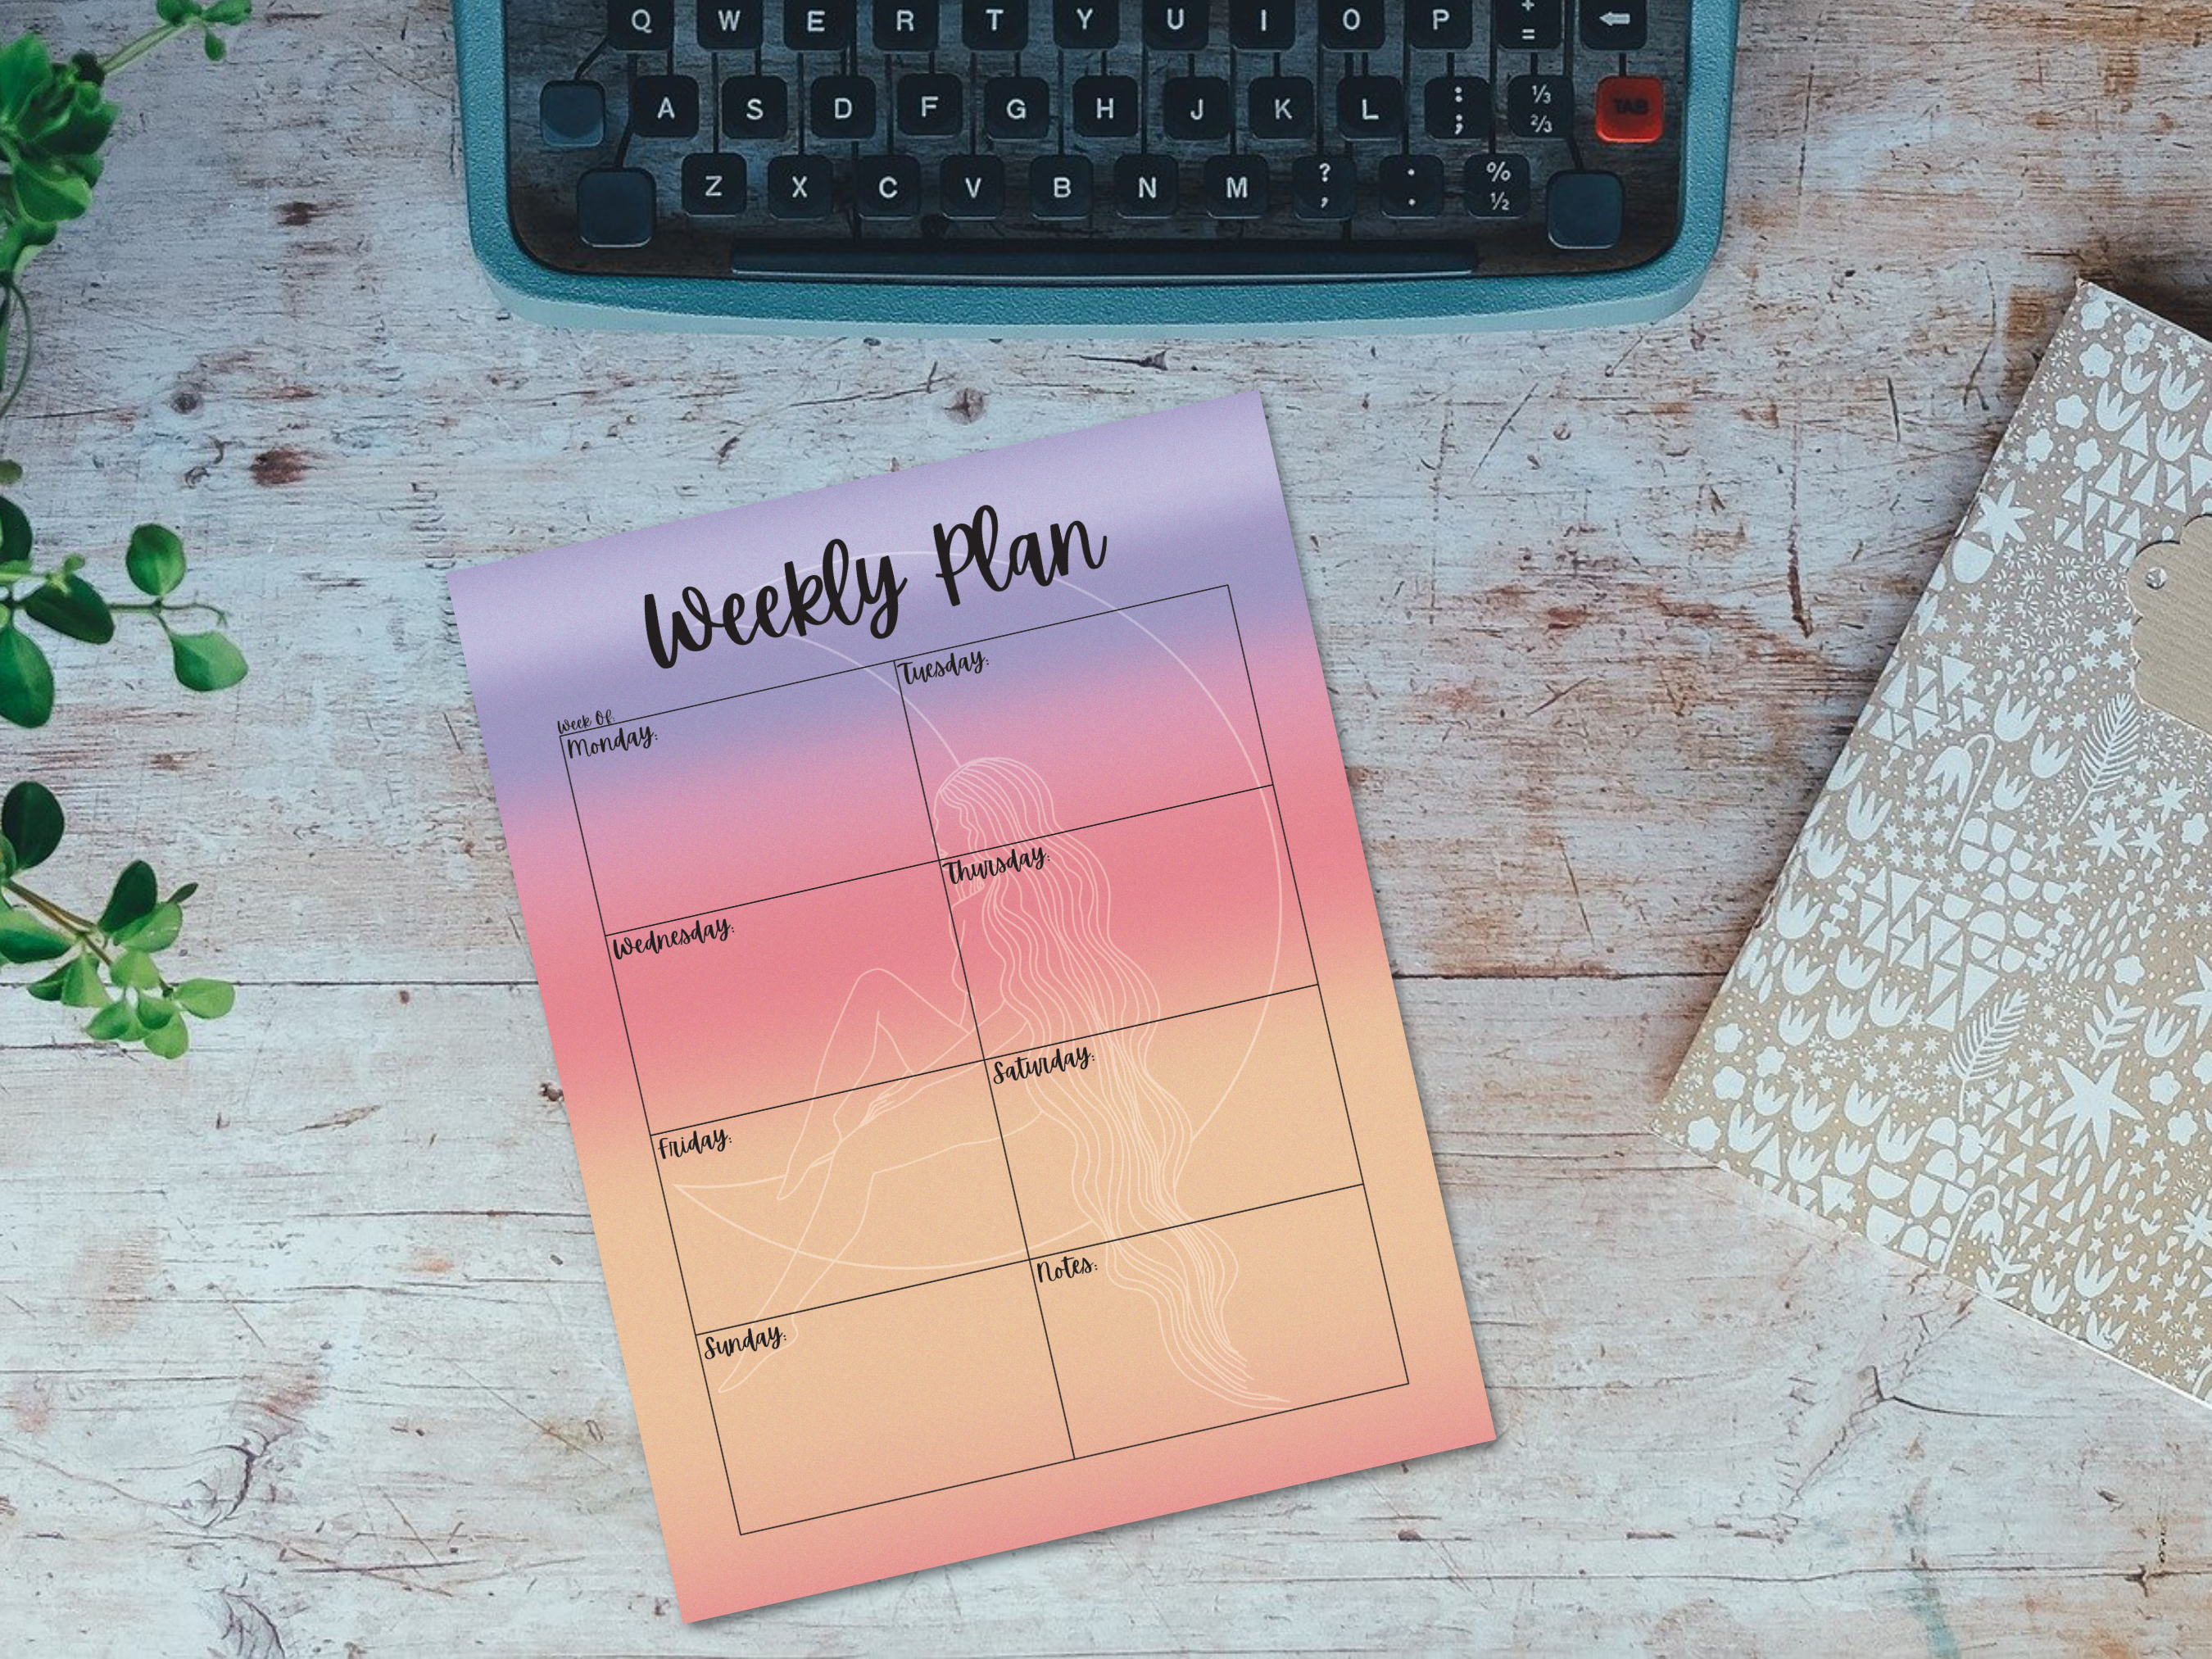 Weekly Planner Page